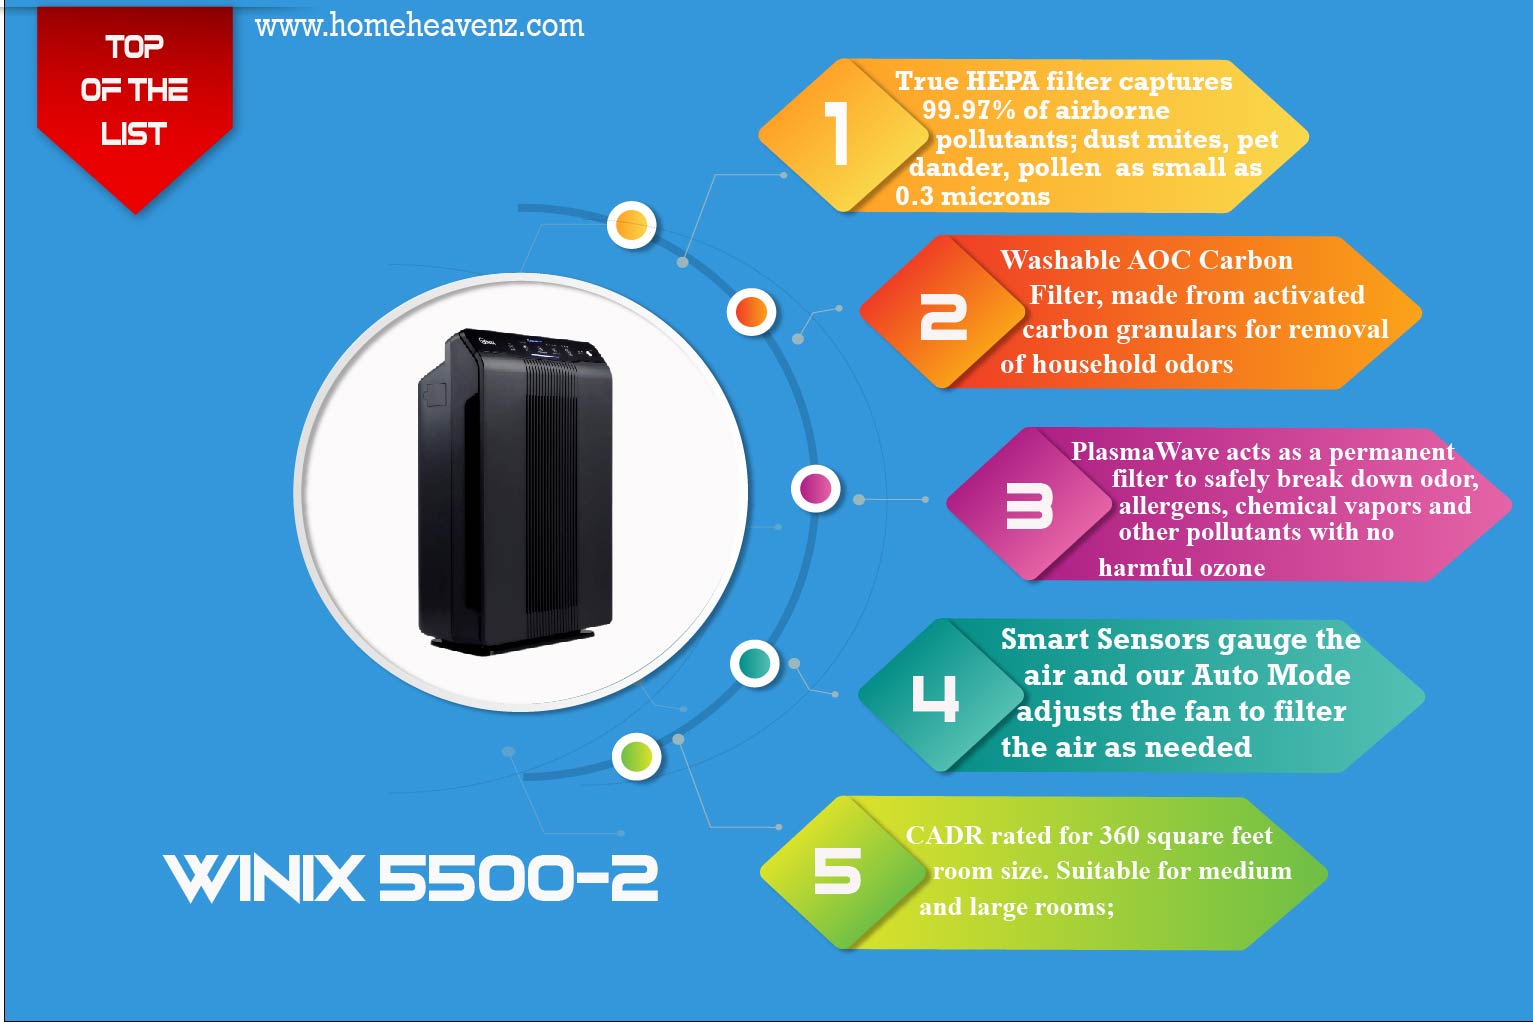 inforgraphic-with-detailed-features-including-true-hepa-filter-carbon-filter-plasma-wave-technology-smart-sensors-cadr-rating-of-Winix-5500-2 – Best-Air-Purifier-for-VOC-removal